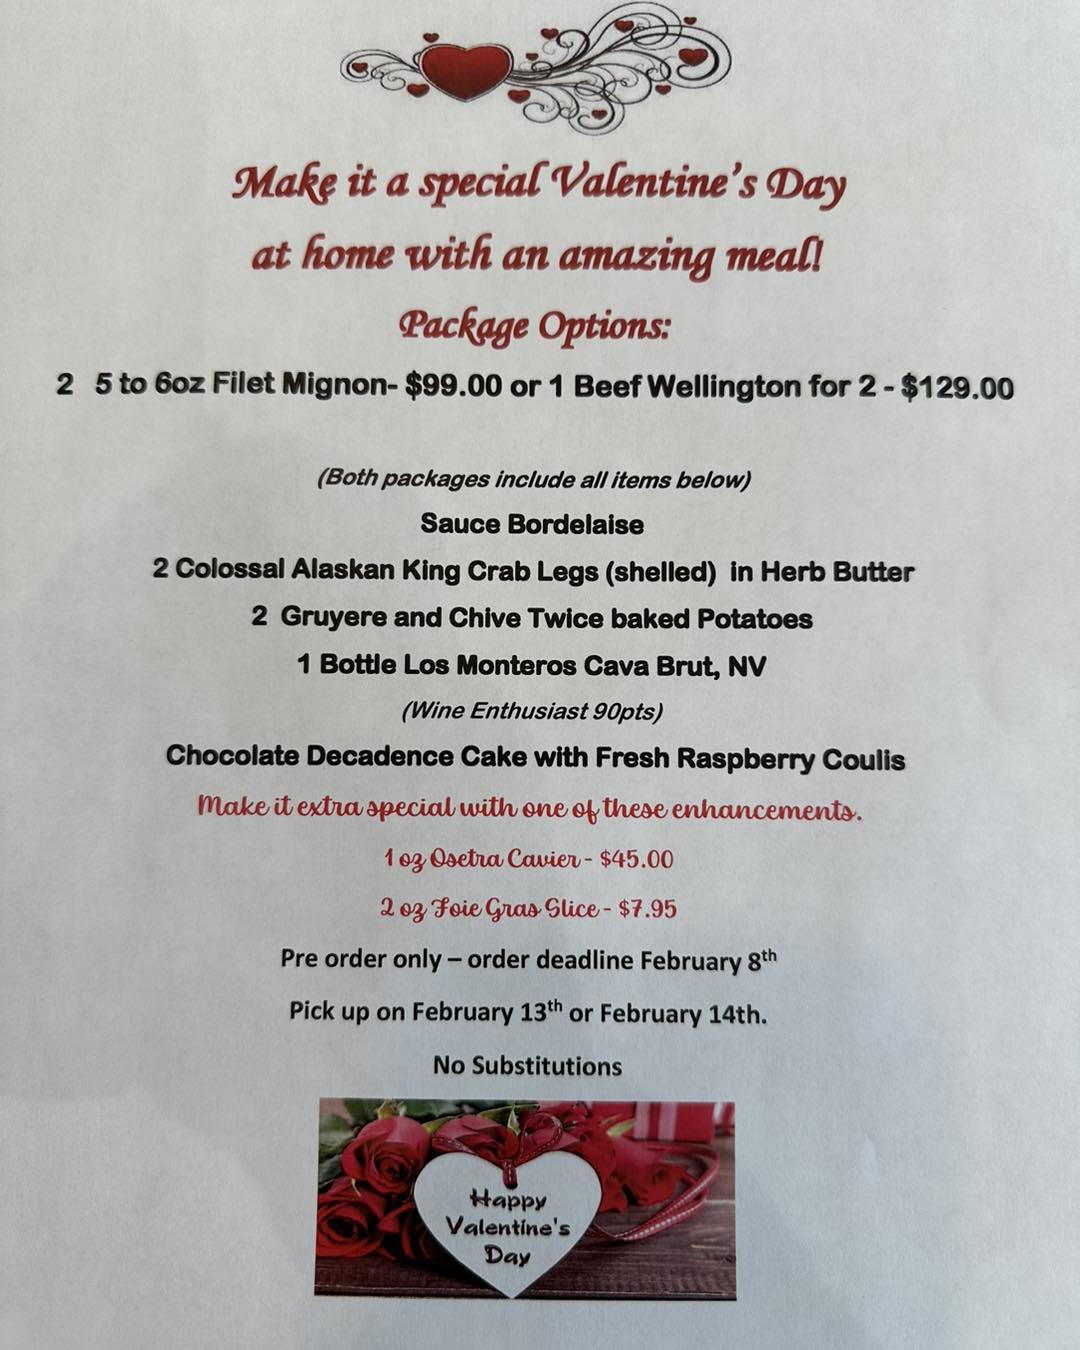 Happy February! Start planning your Valentines dinner with this great package.